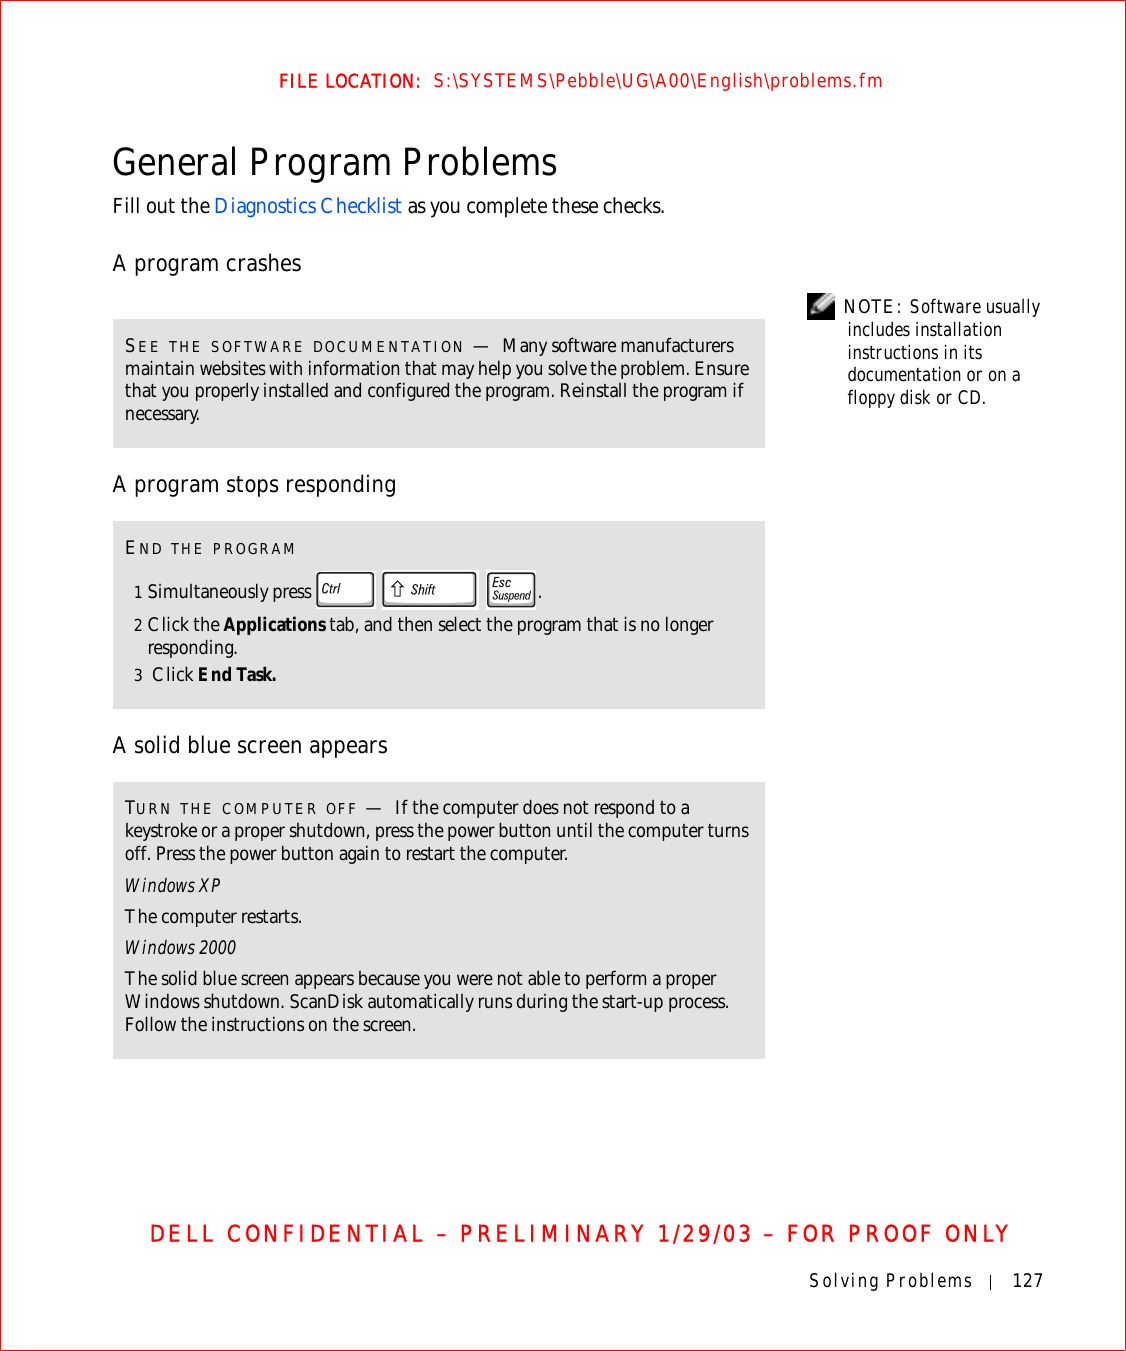 Solving Problems 127FILE LOCATION:  S:\SYSTEMS\Pebble\UG\A00\English\problems.fmDELL CONFIDENTIAL – PRELIMINARY 1/29/03 – FOR PROOF ONLYGeneral Program ProblemsFill out the Diagnostics Checklist as you complete these checks.A program crashes NOTE: Software usually includes installation instructions in its documentation or on a floppy disk or CD.A program stops responding A solid blue screen appearsSEE THE SOFTWARE DOCUMENTATION —Many software manufacturers maintain websites with information that may help you solve the problem. Ensure that you properly installed and configured the program. Reinstall the program if necessary.END THE PROGRAM1Simultaneously press    .2Click the Applications tab, and then select the program that is no longer responding. 3 Click End Task. TURN THE COMPUTER OFF —If the computer does not respond to a keystroke or a proper shutdown, press the power button until the computer turns off. Press the power button again to restart the computer. Windows XPThe computer restarts.Windows 2000The solid blue screen appears because you were not able to perform a proper Windows shutdown. ScanDisk automatically runs during the start-up process. Follow the instructions on the screen.